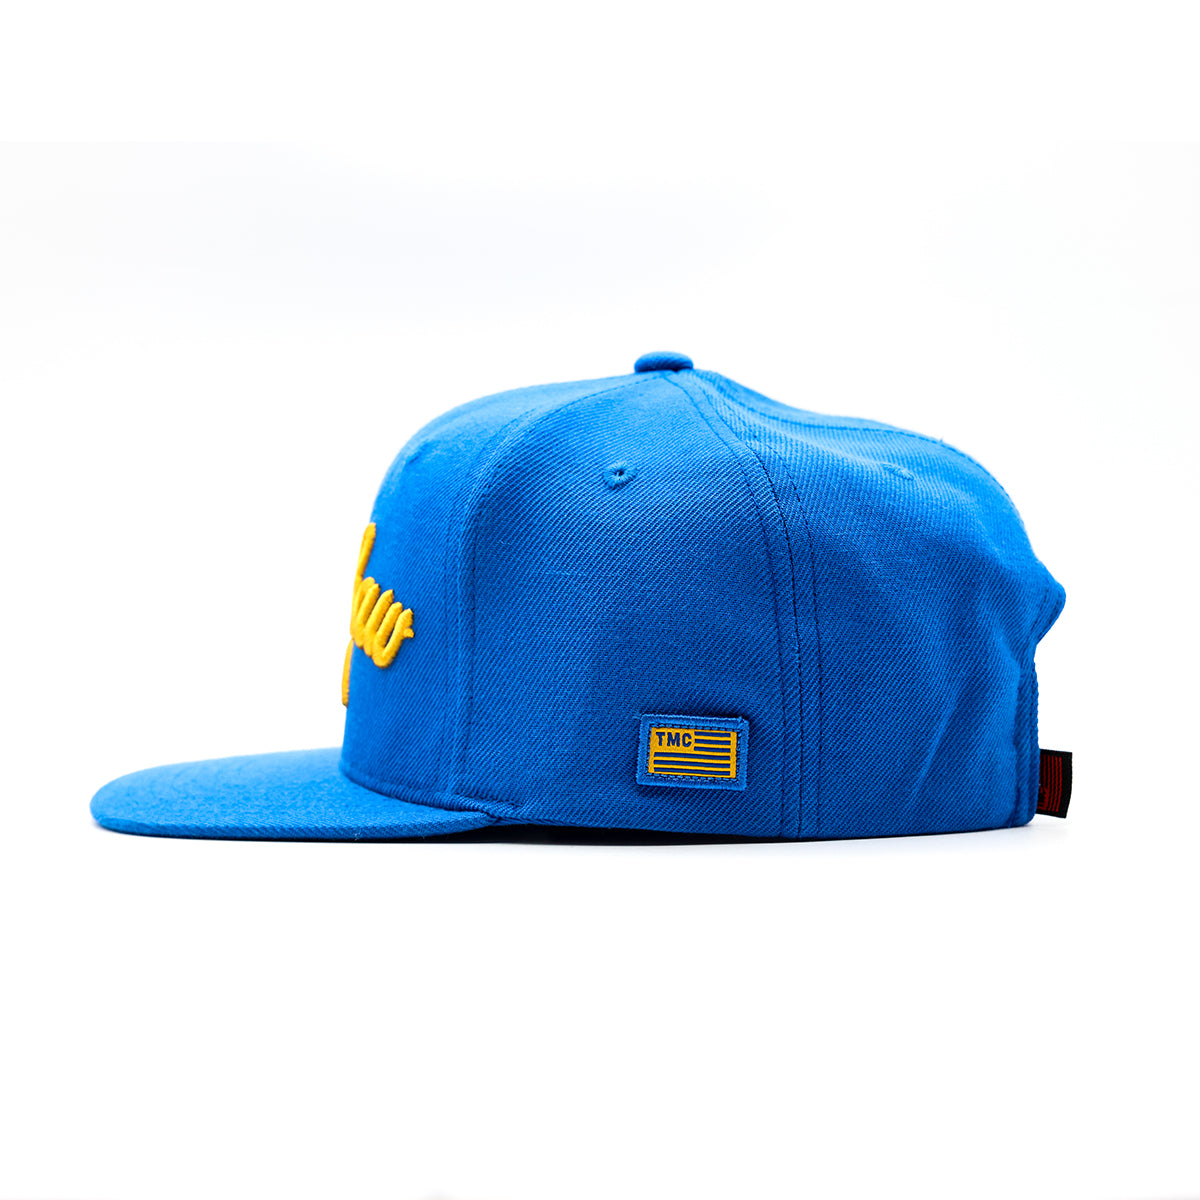 Crenshaw Limited Edition Snapback - Royal/Yellow [3D] - Side